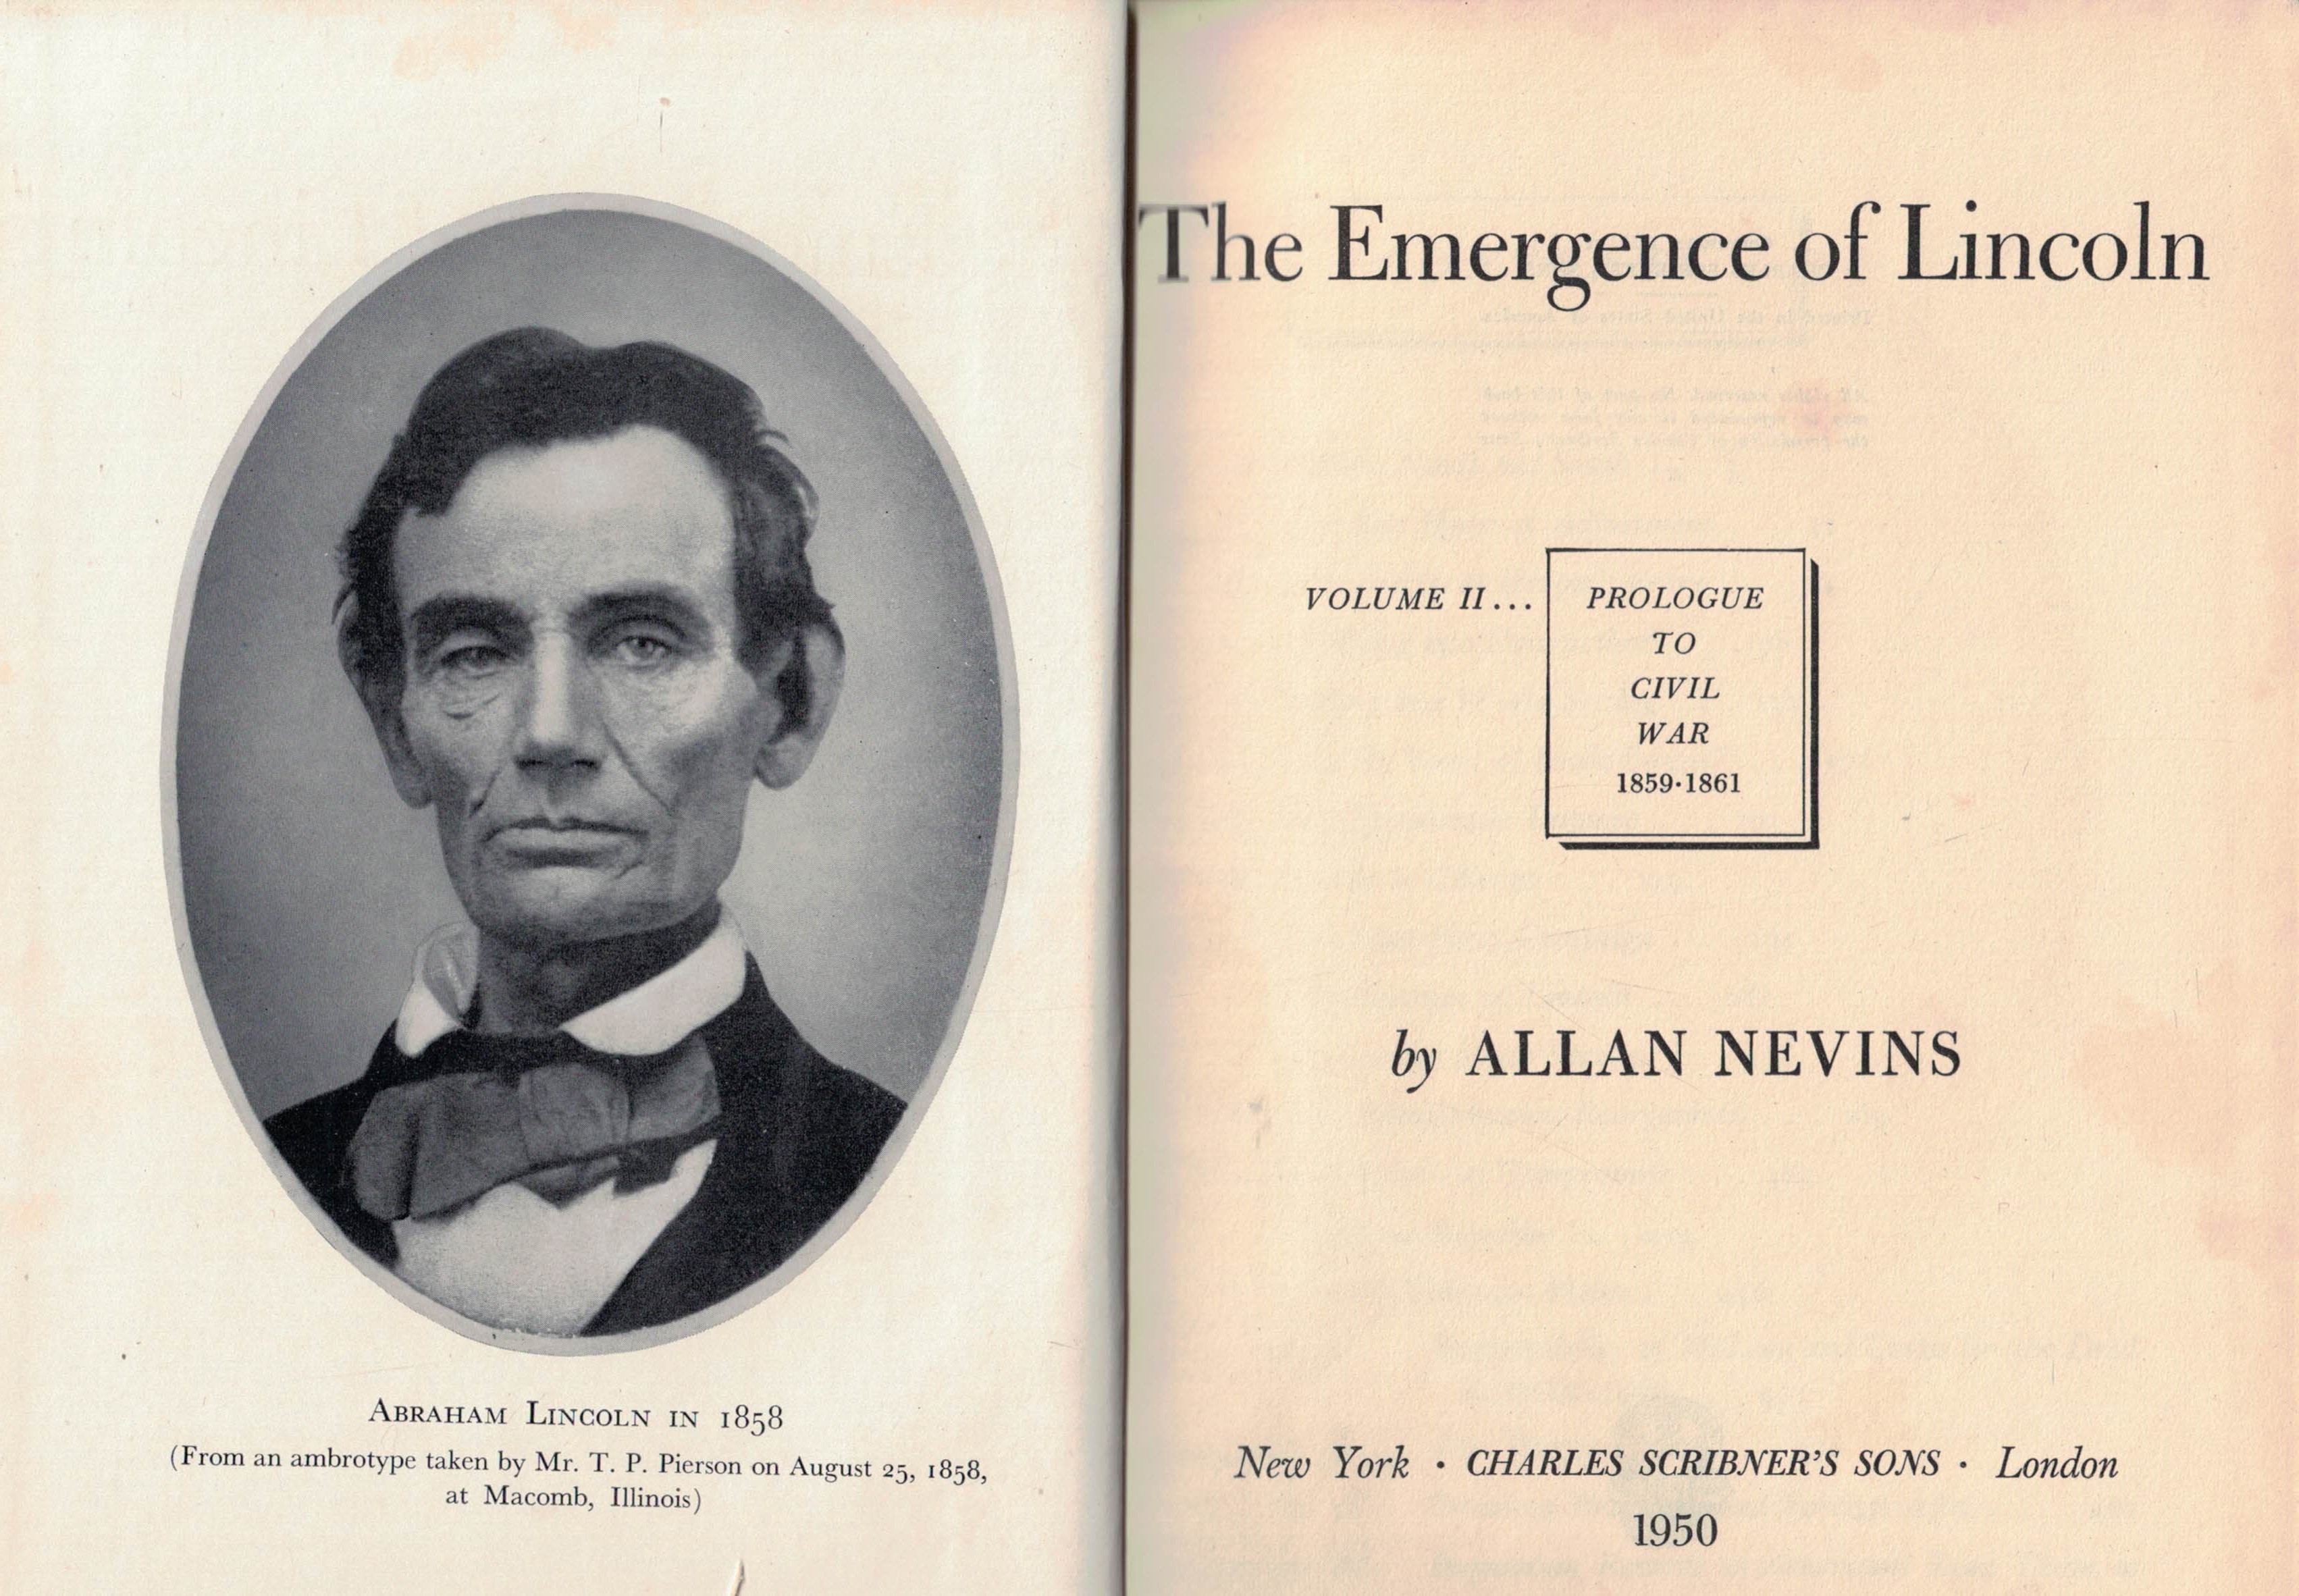 The Emergence of Lincoln. Douglas, Buchanan, and Party Chaos 1857 - 1859 + Prologue to Civil War 1859 - 1861. 2 volume set.